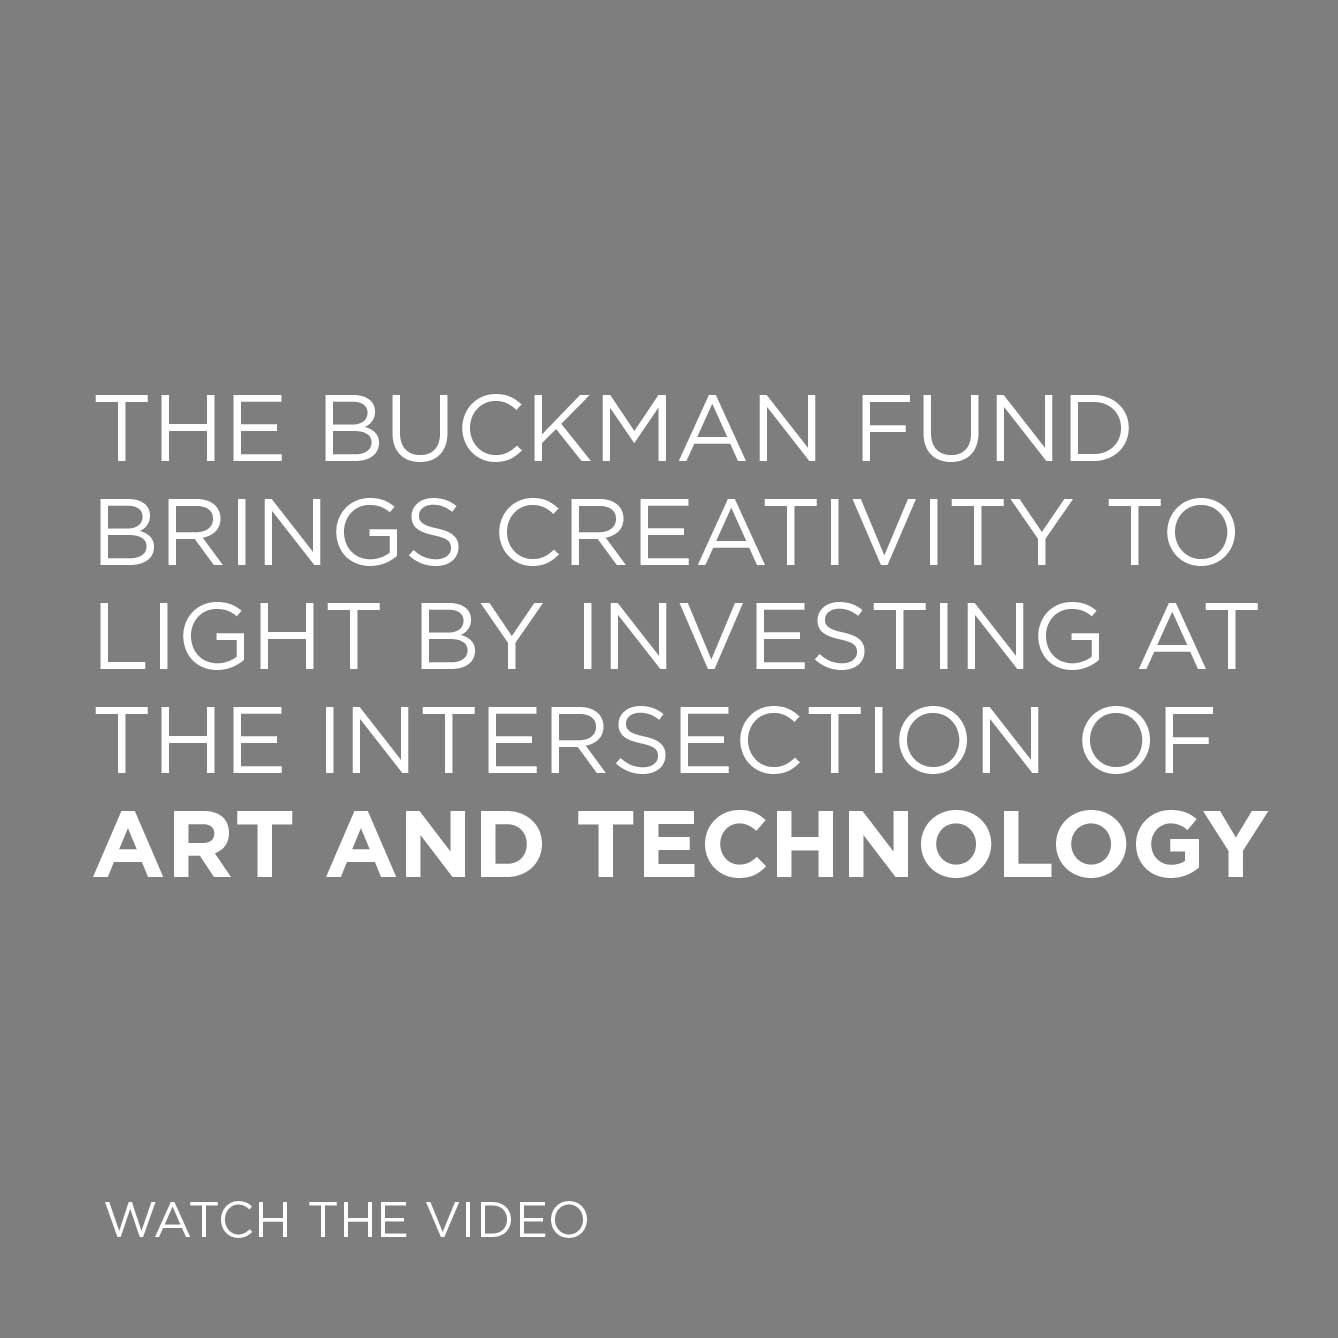 The Buckman Fund brings creativity to light by investing at the intersection of art and technology – watch the video